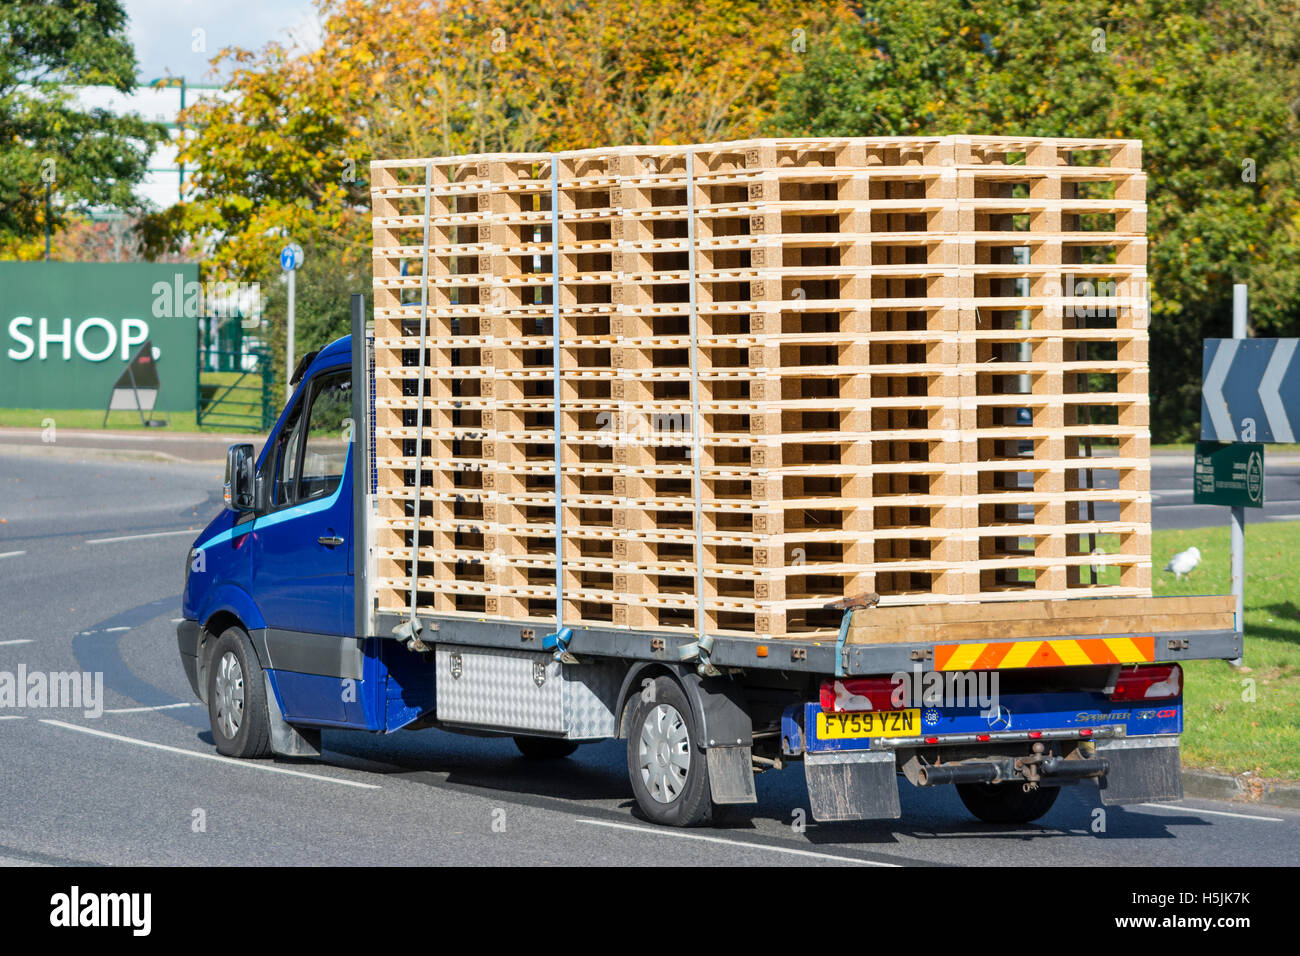 Wooden pallets being transported on a van. Stock Photo